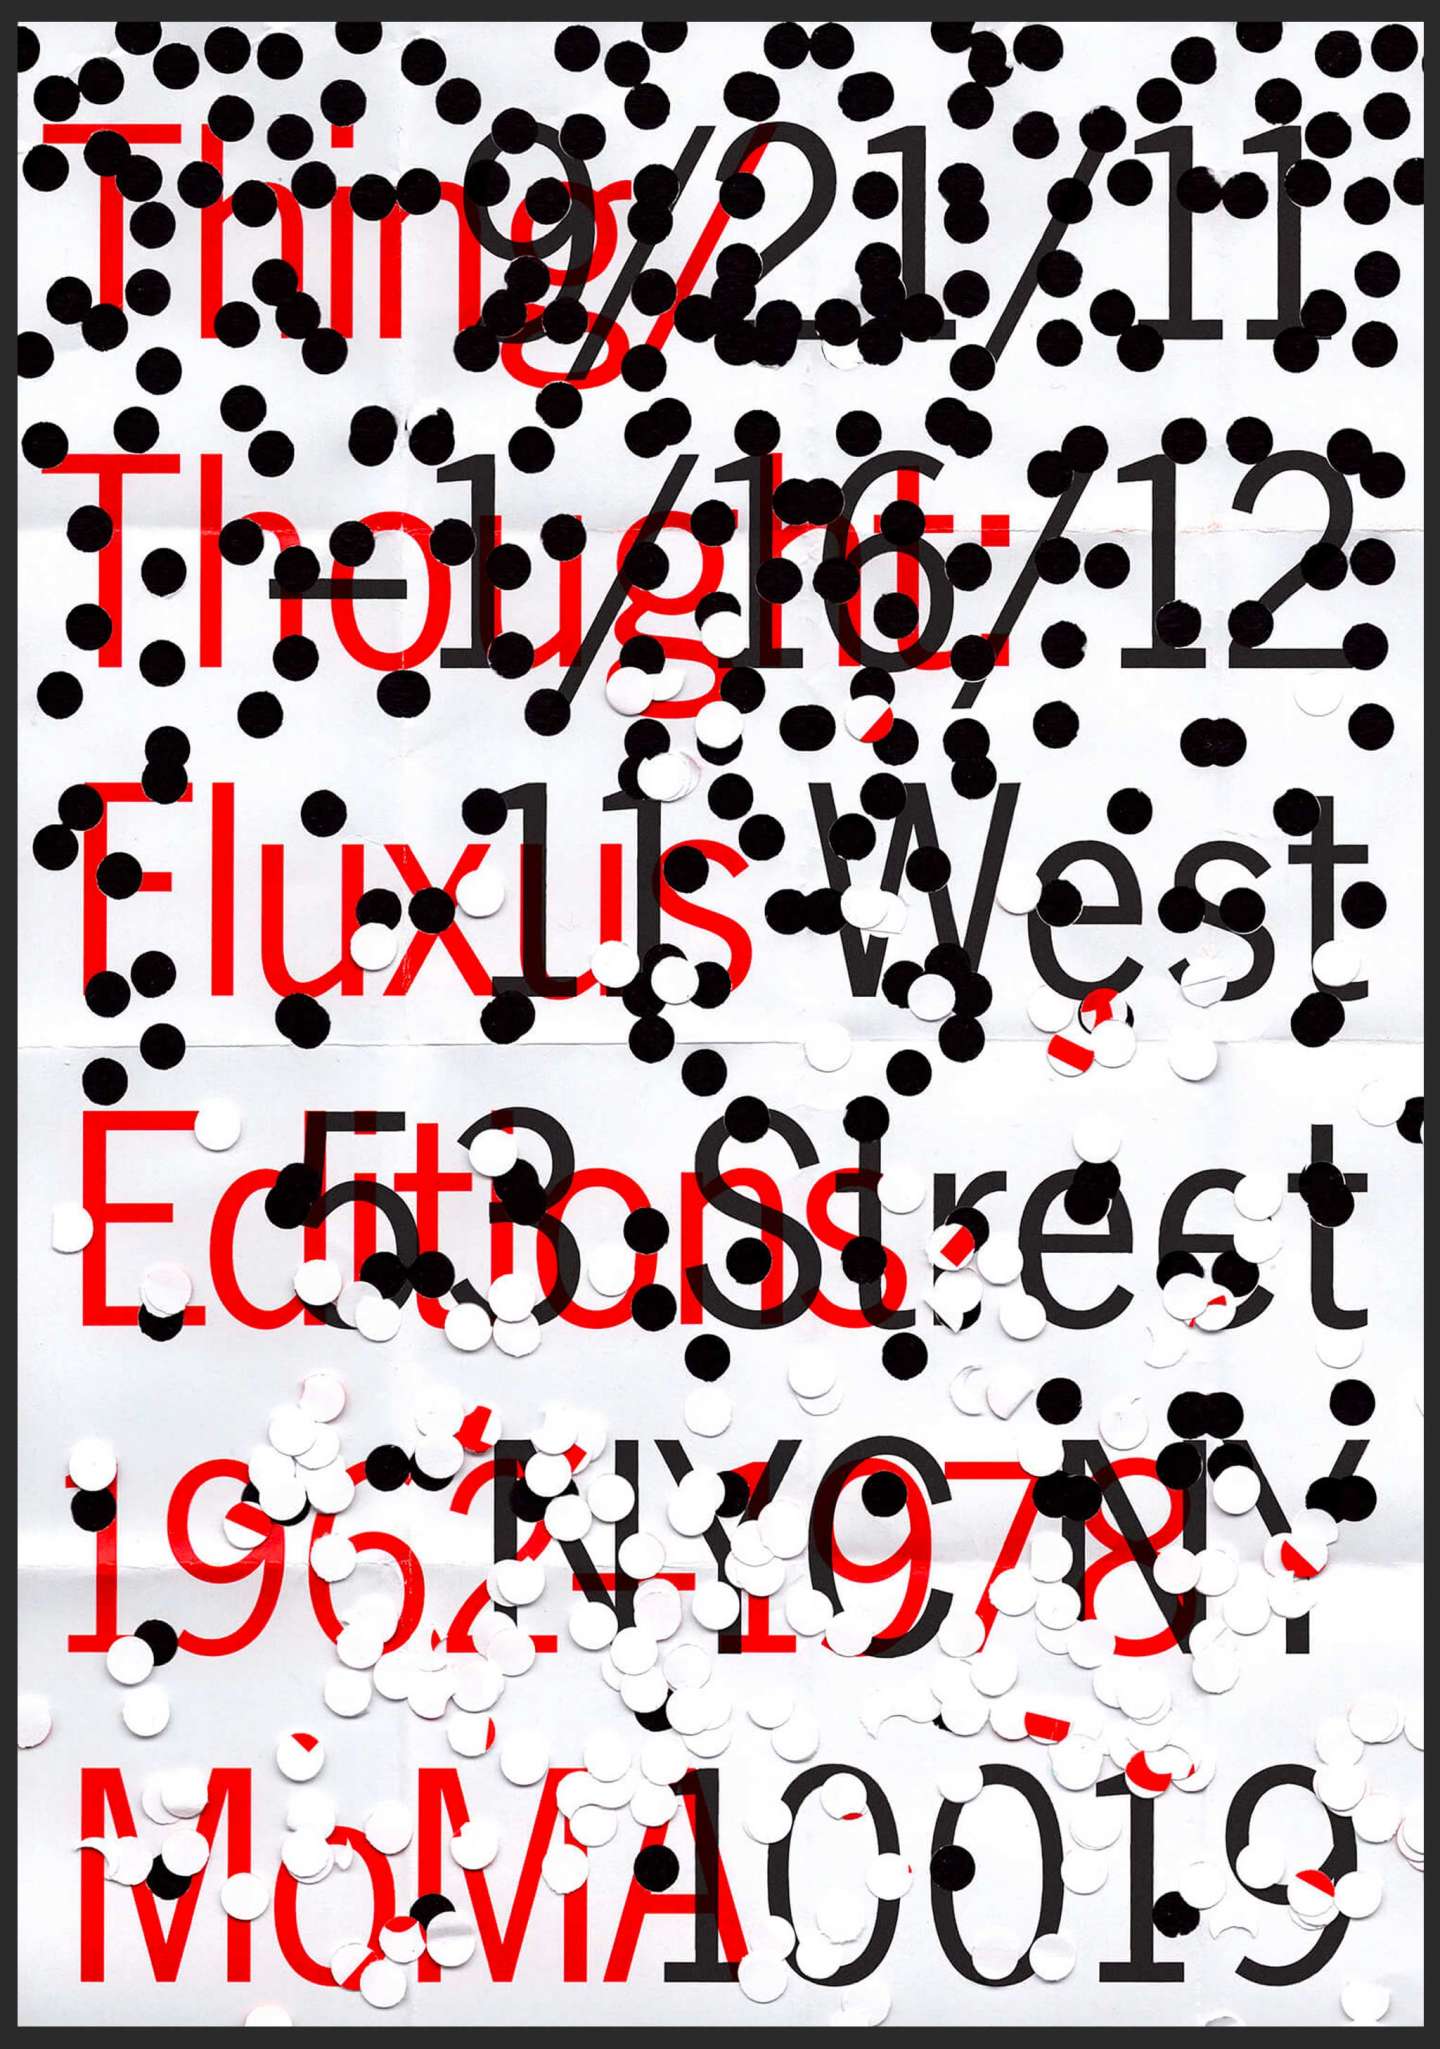 Thing/Thought: Fluxus Editions